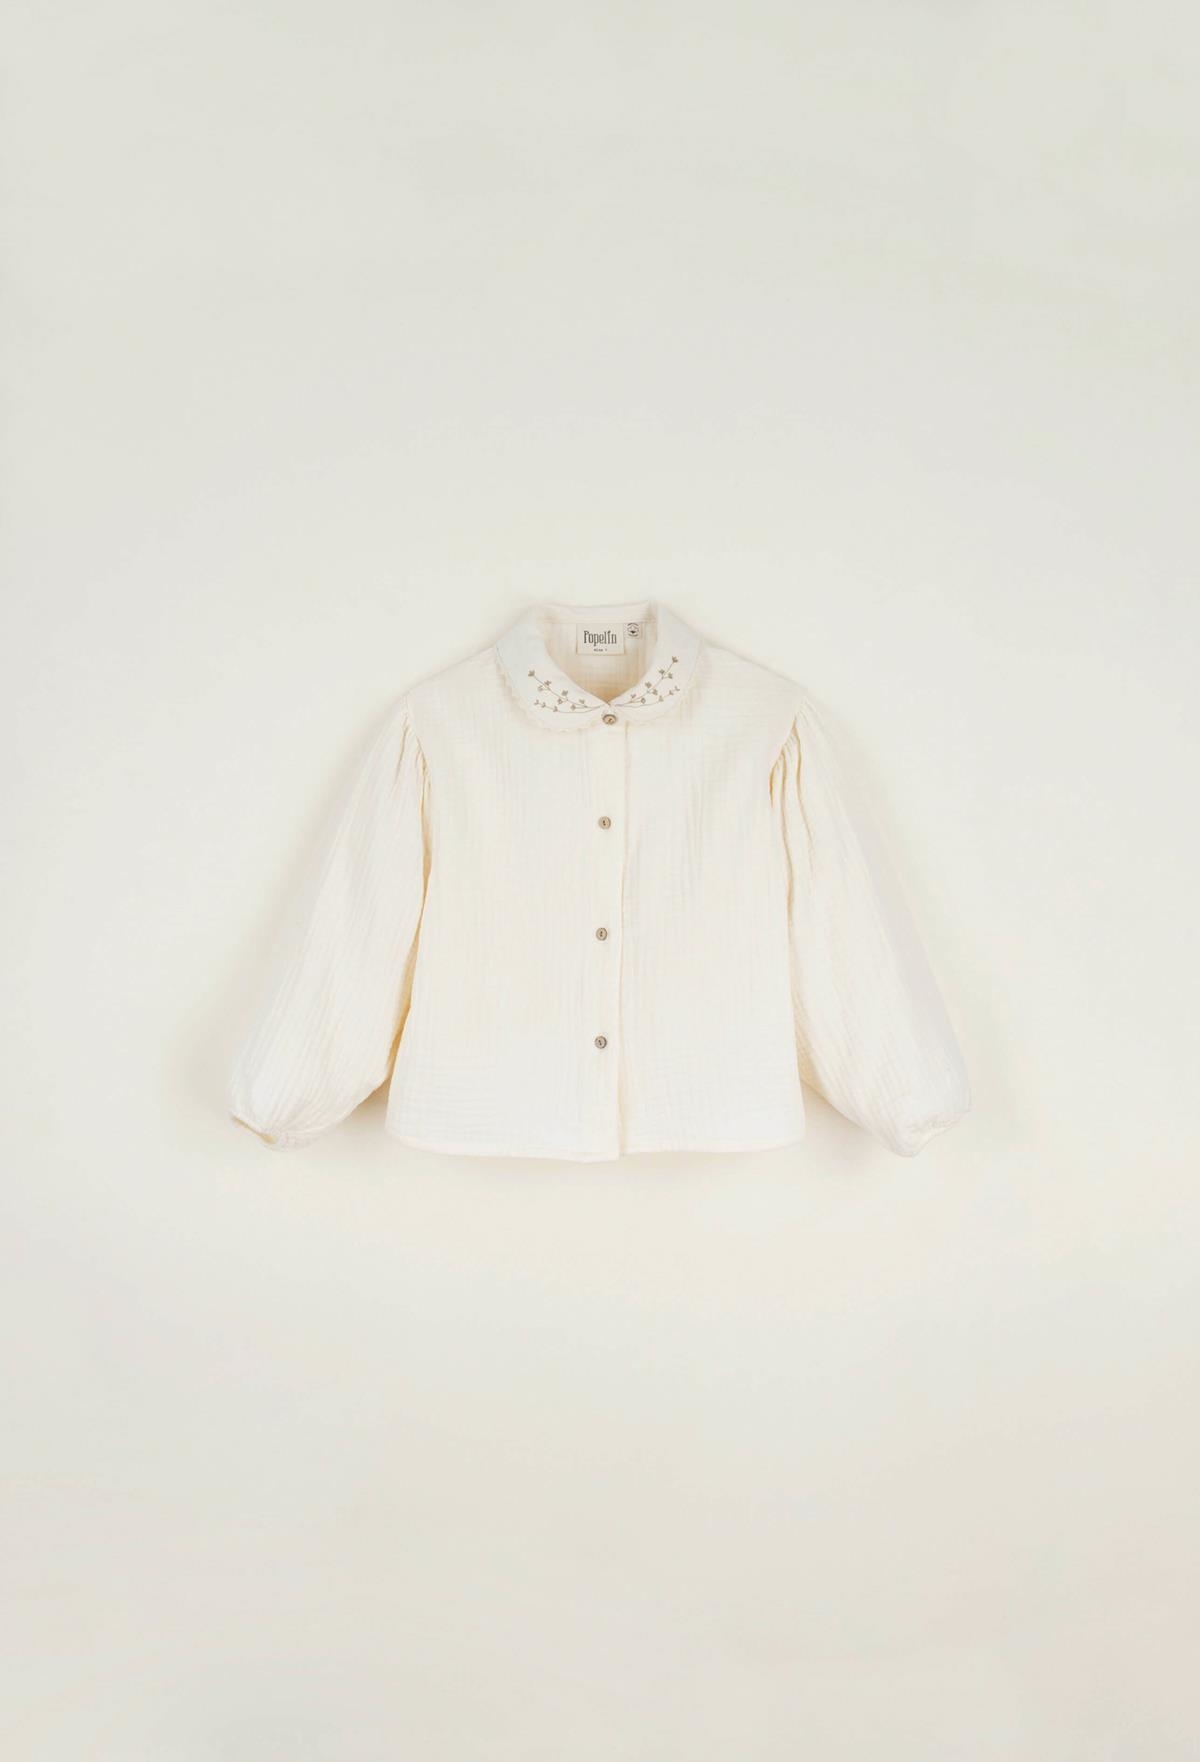 Mod.13.1 Off-white blouse with embroidered collar | AW22.23 Mod.13.1 Off-white blouse with embroidered collar